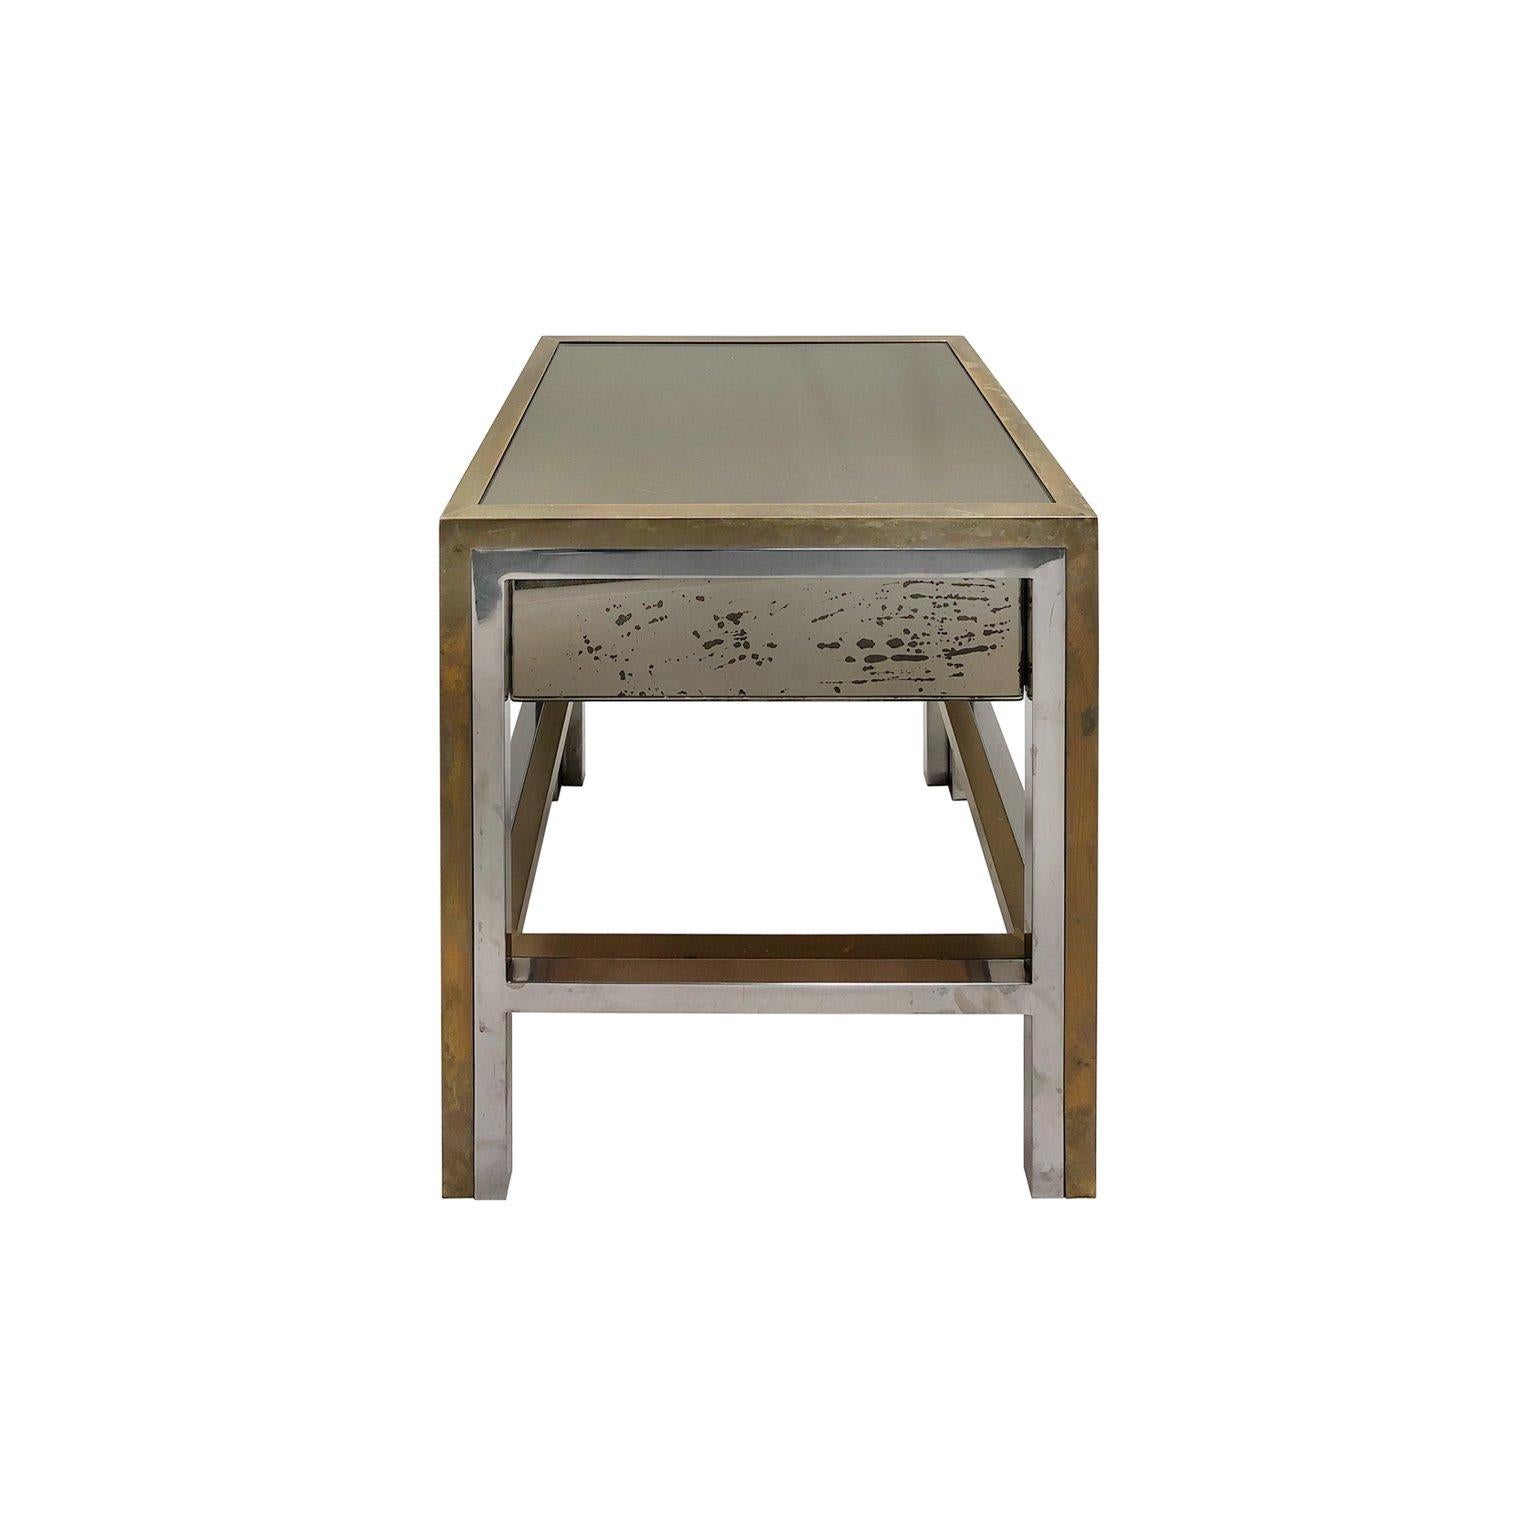 1970s French Brass and Chrome Square Side Table with Mirrored Glass Drawer